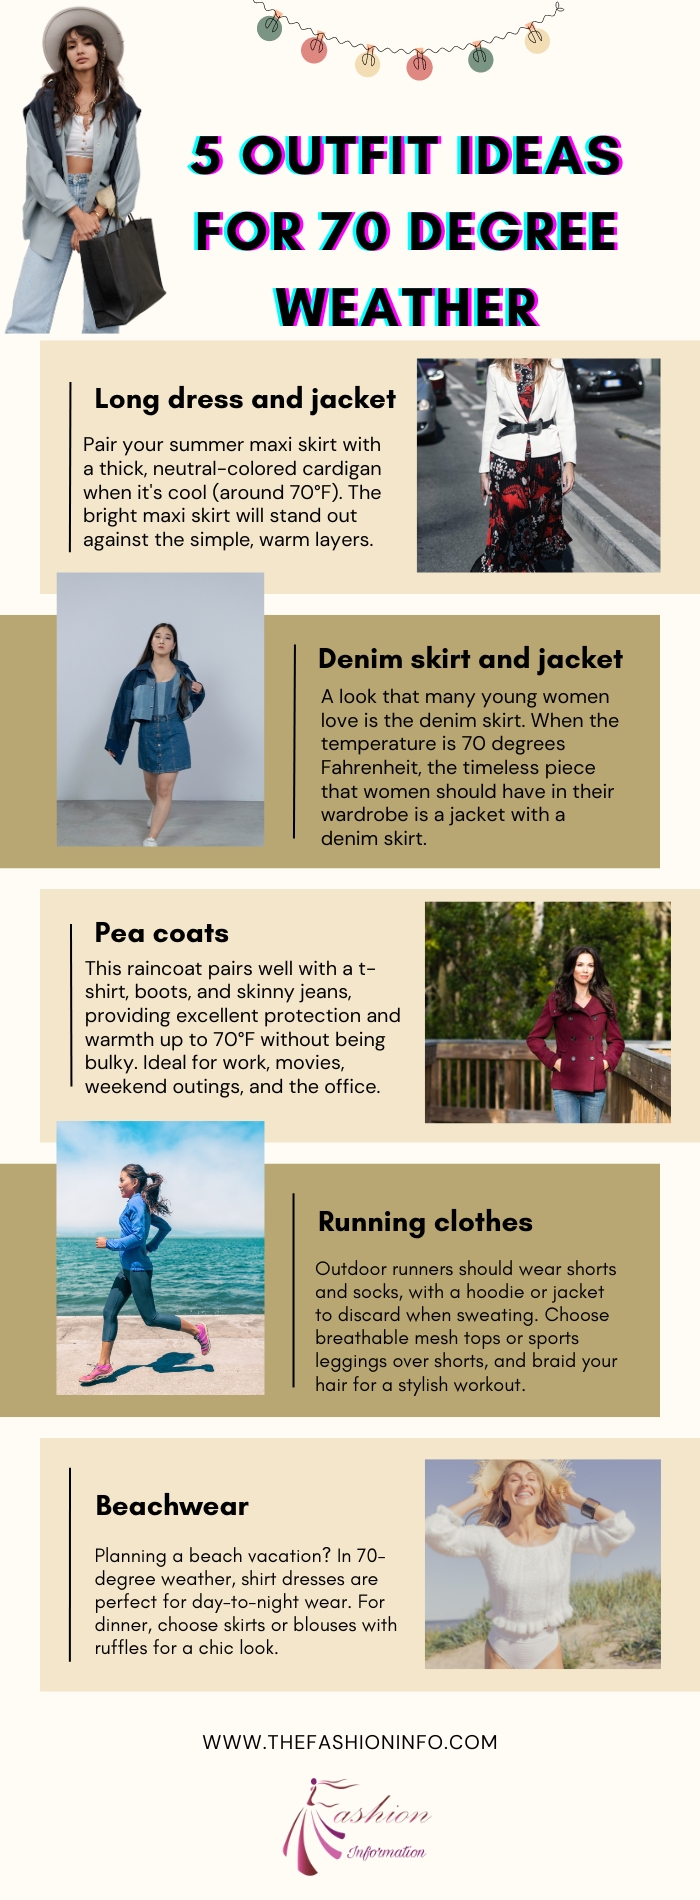 5 outfit ideas for 70 degree weather 